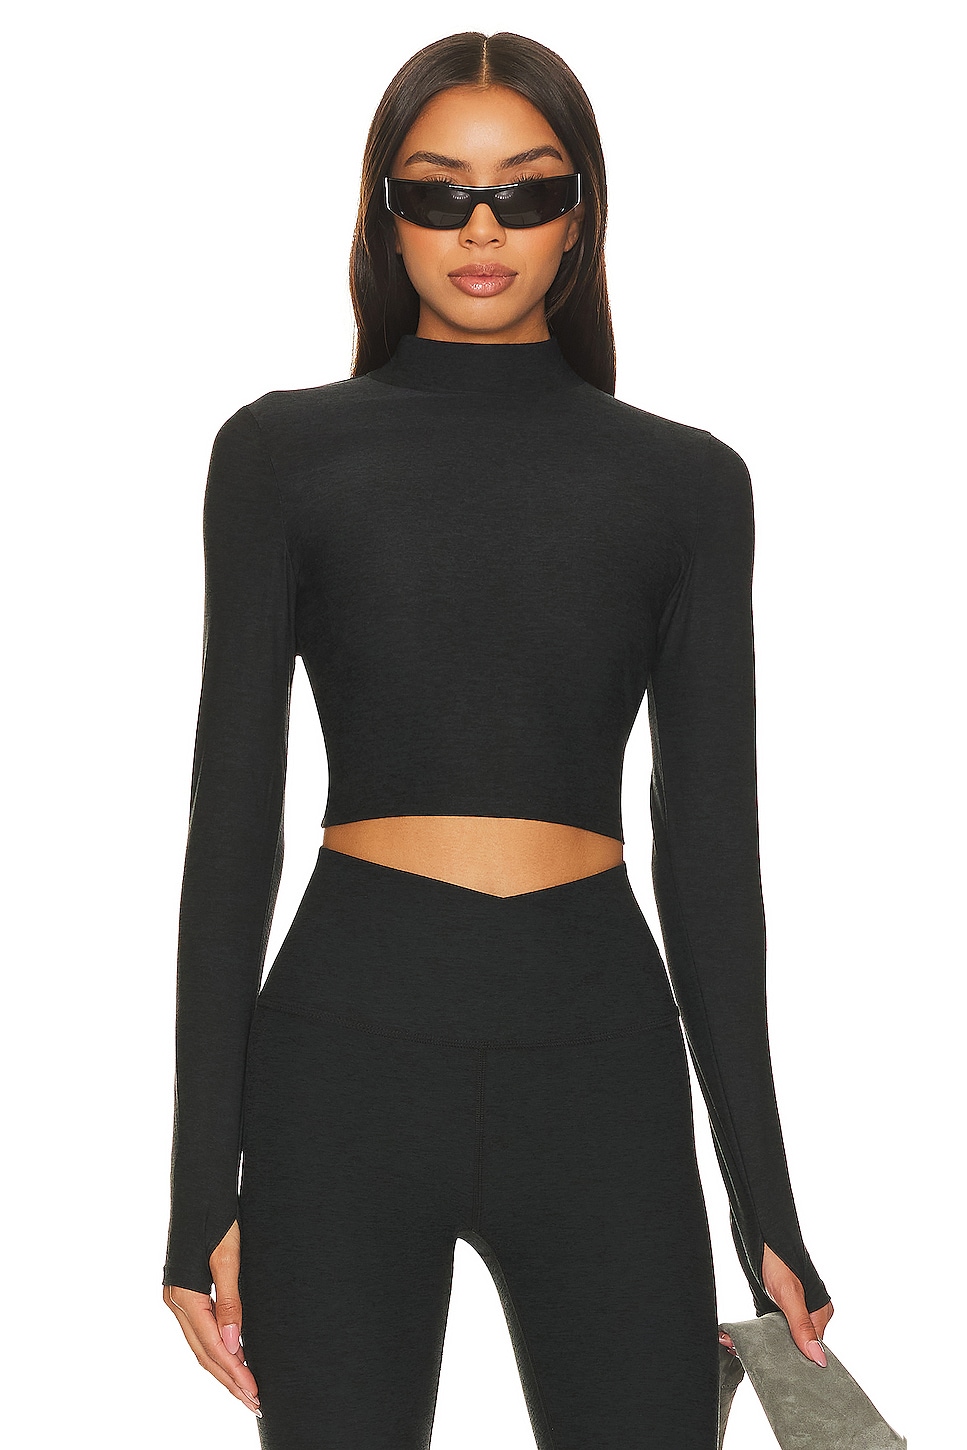 Beyond Yoga Featherweight Moving On Cropped Top in Darkest Night